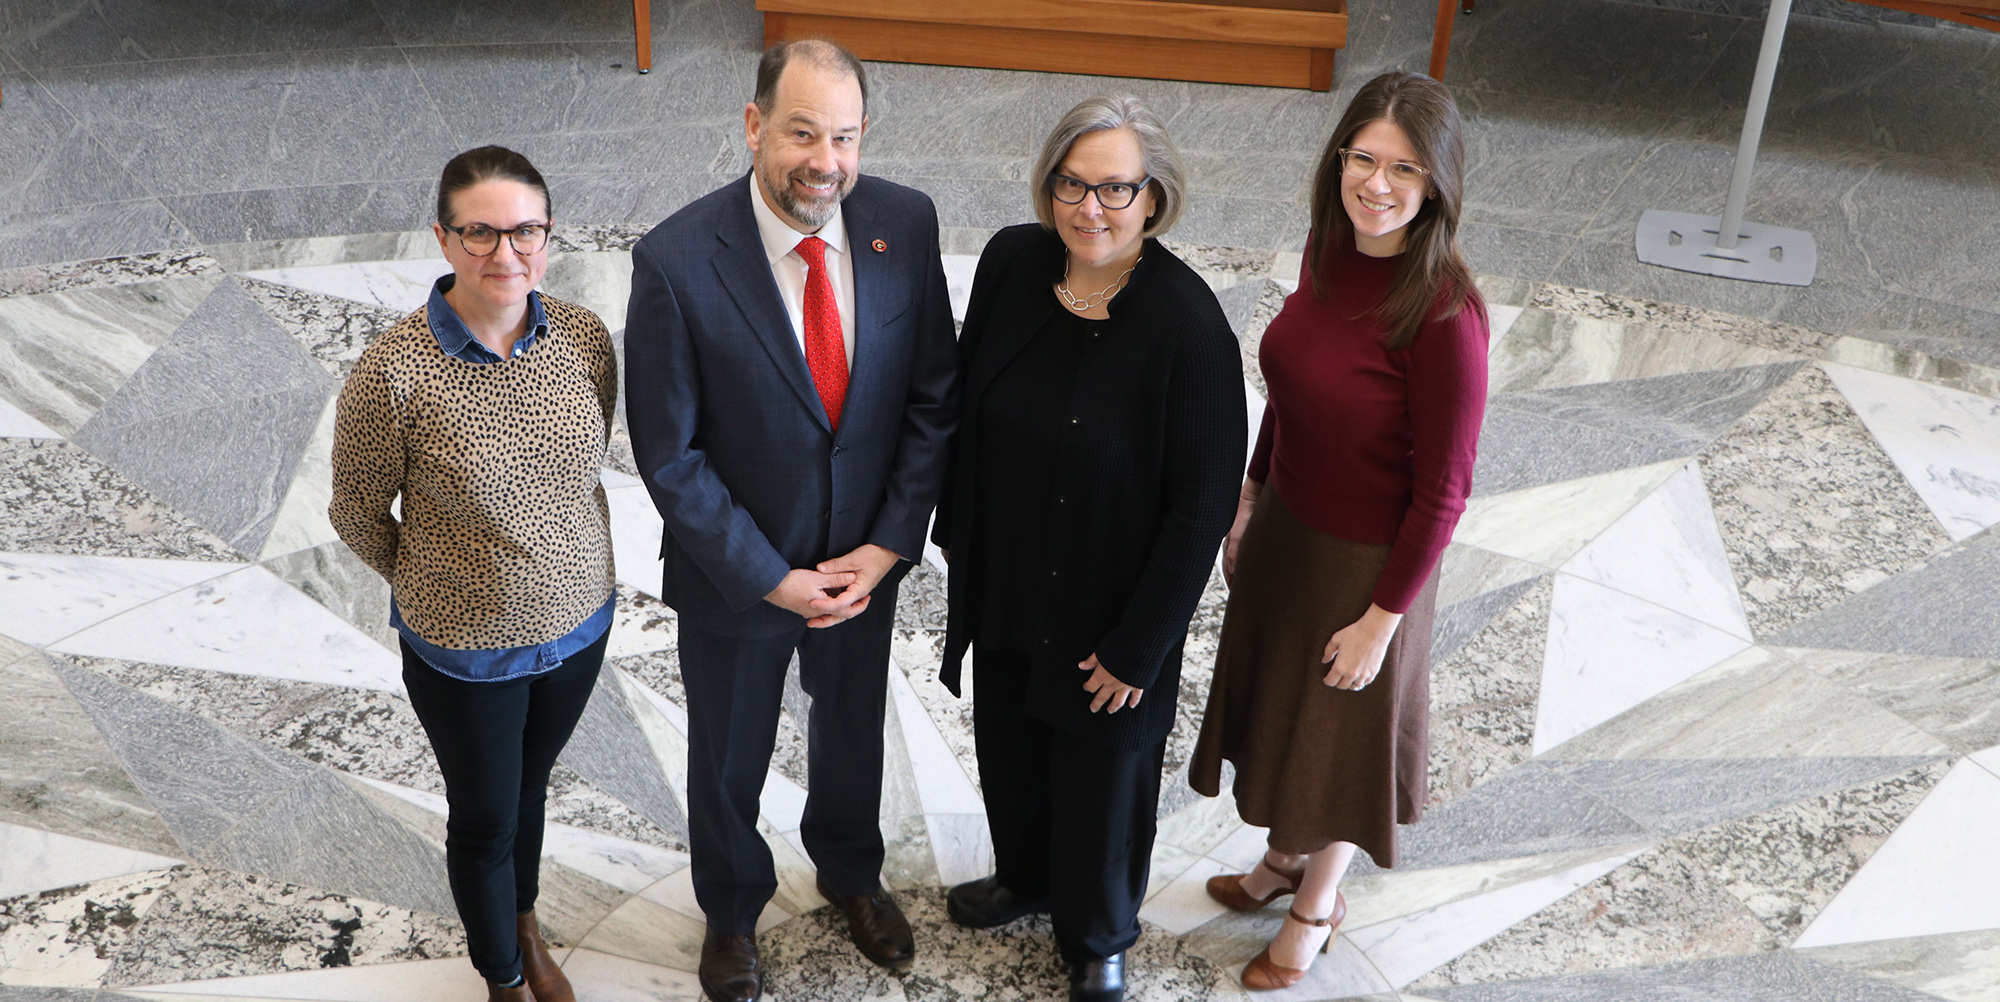 Photo of, left to right, Sara Wright, Toby Graham, Emily Gore, and Kat Stein, all smiling and looking upwards towards the camera in the Special Collections Building lobby